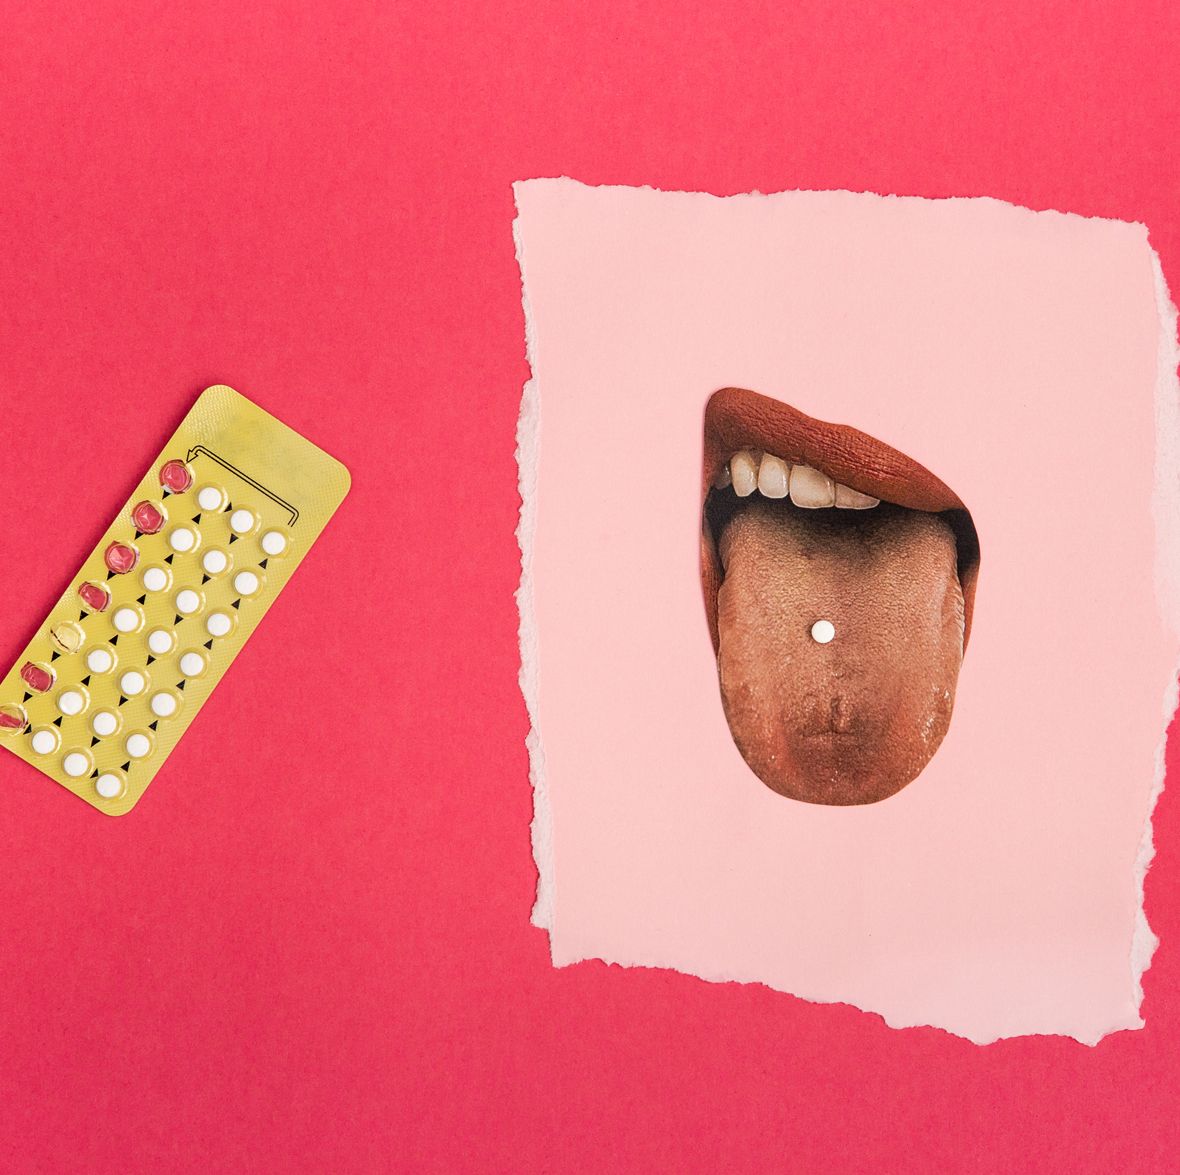 24 Side Effects of the Birth Control Pill - Oral Contraceptive